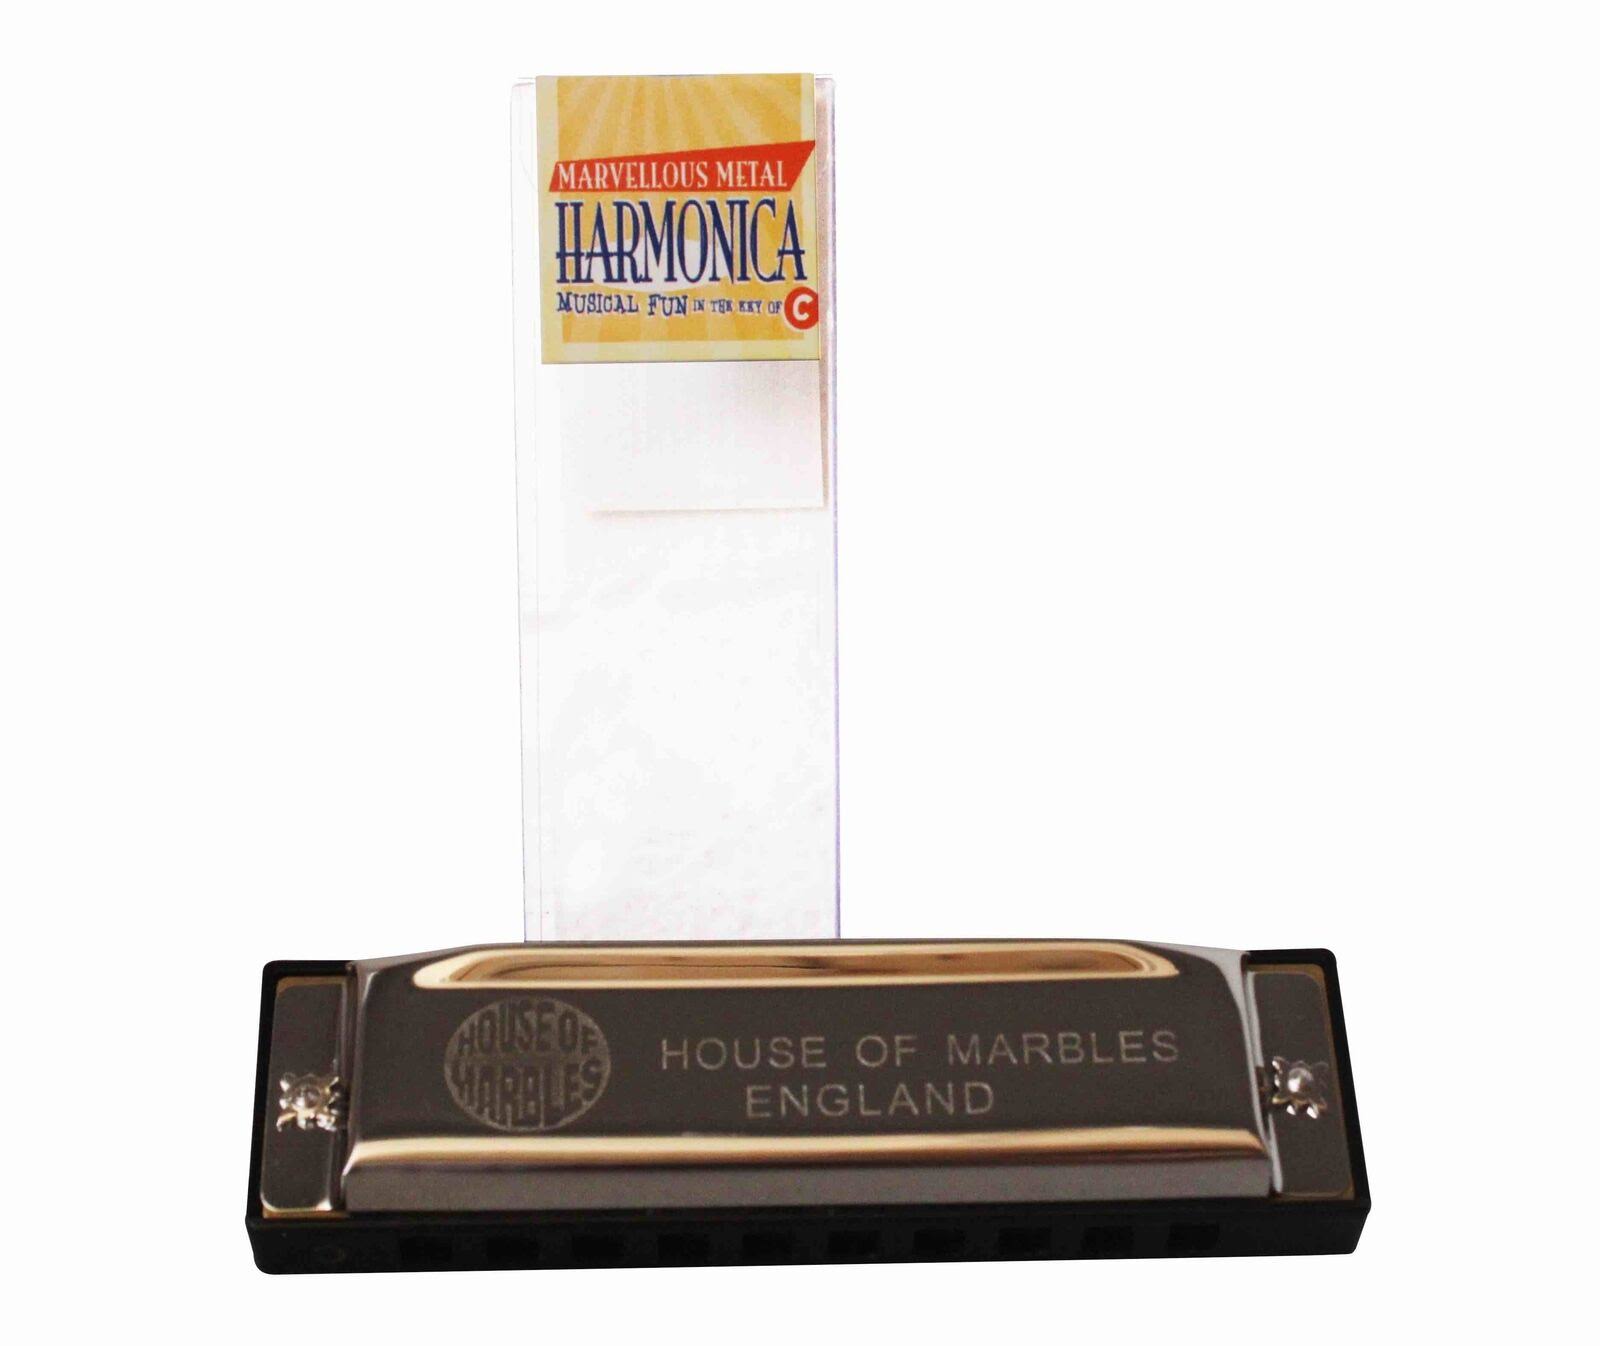 House of Marbles Metal Harmonica